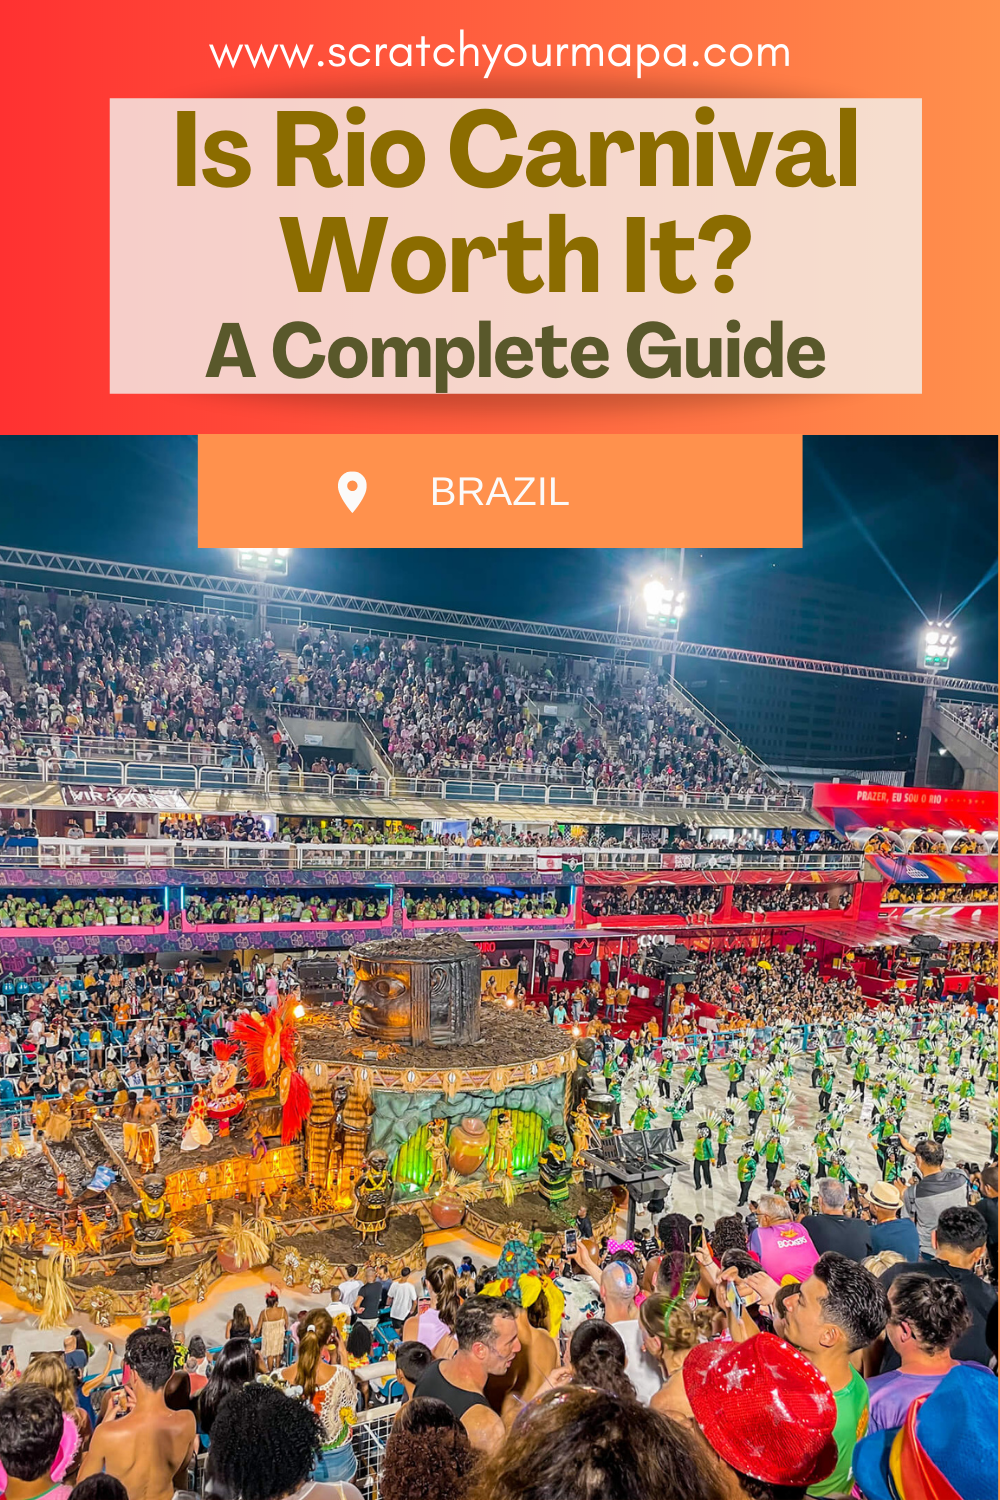 Is Rio Carnival Worth It?